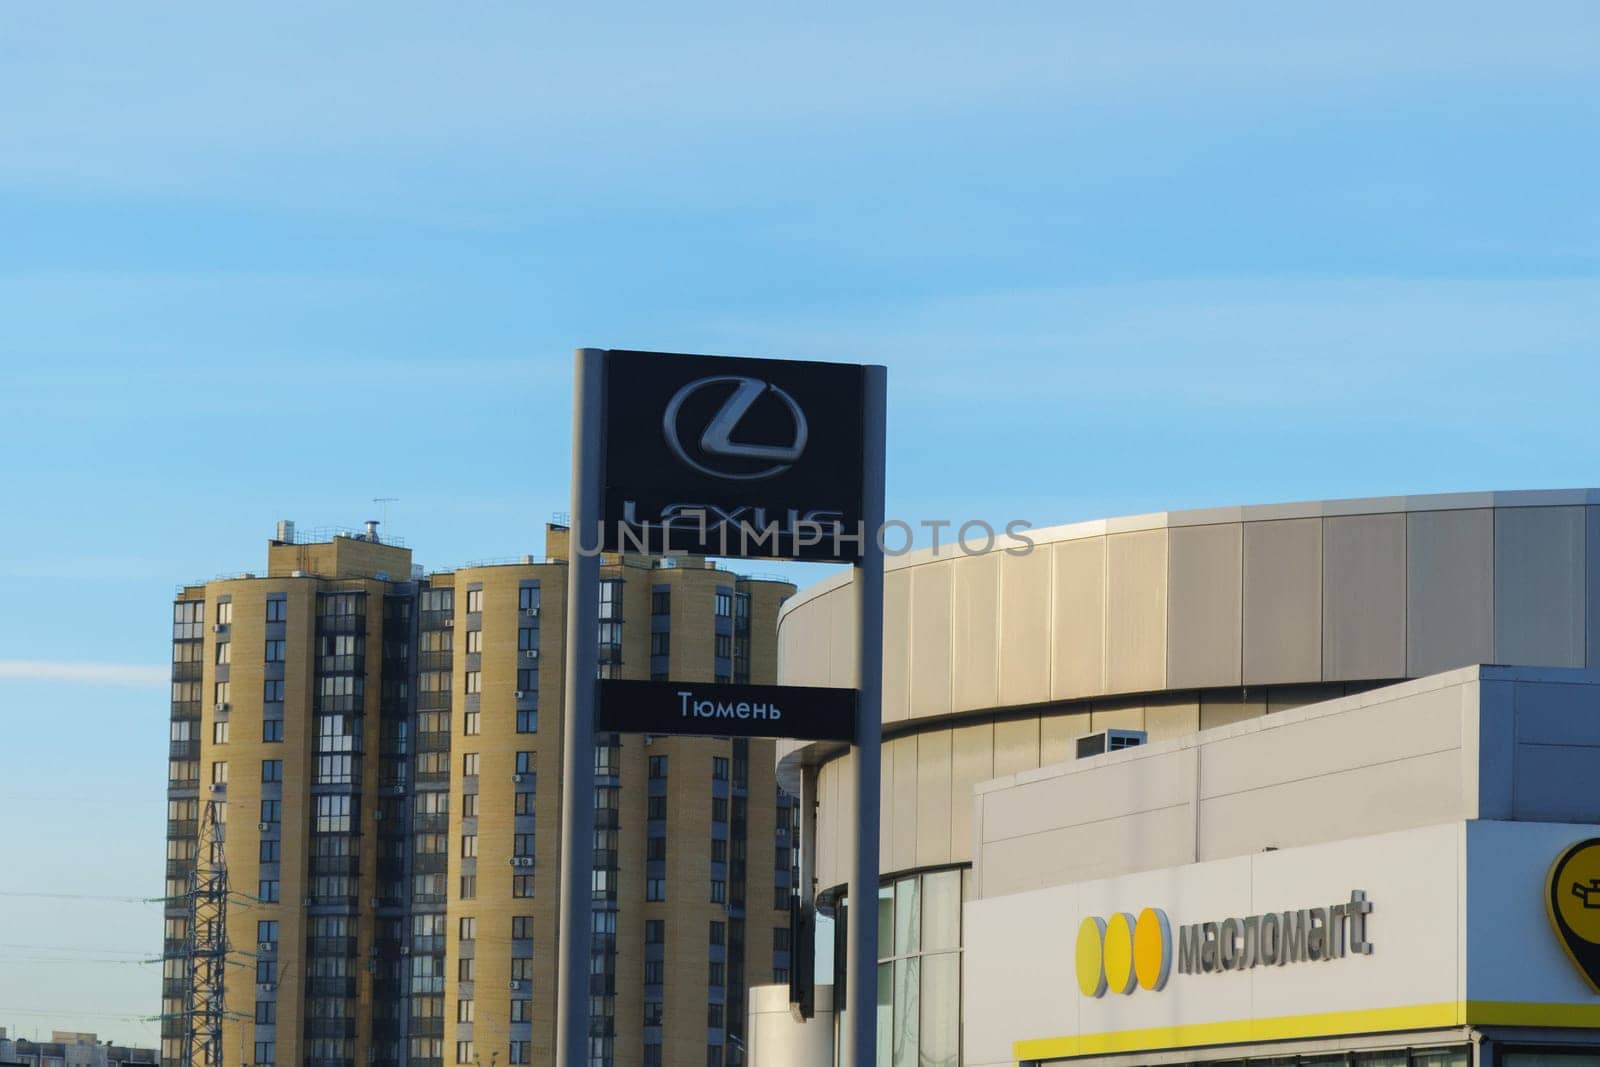 Tyumen, Russia-March 18, 2024: Sign displaying the Lexus logo on the side of a building, indicating a dealership or service center for the luxury car brand.